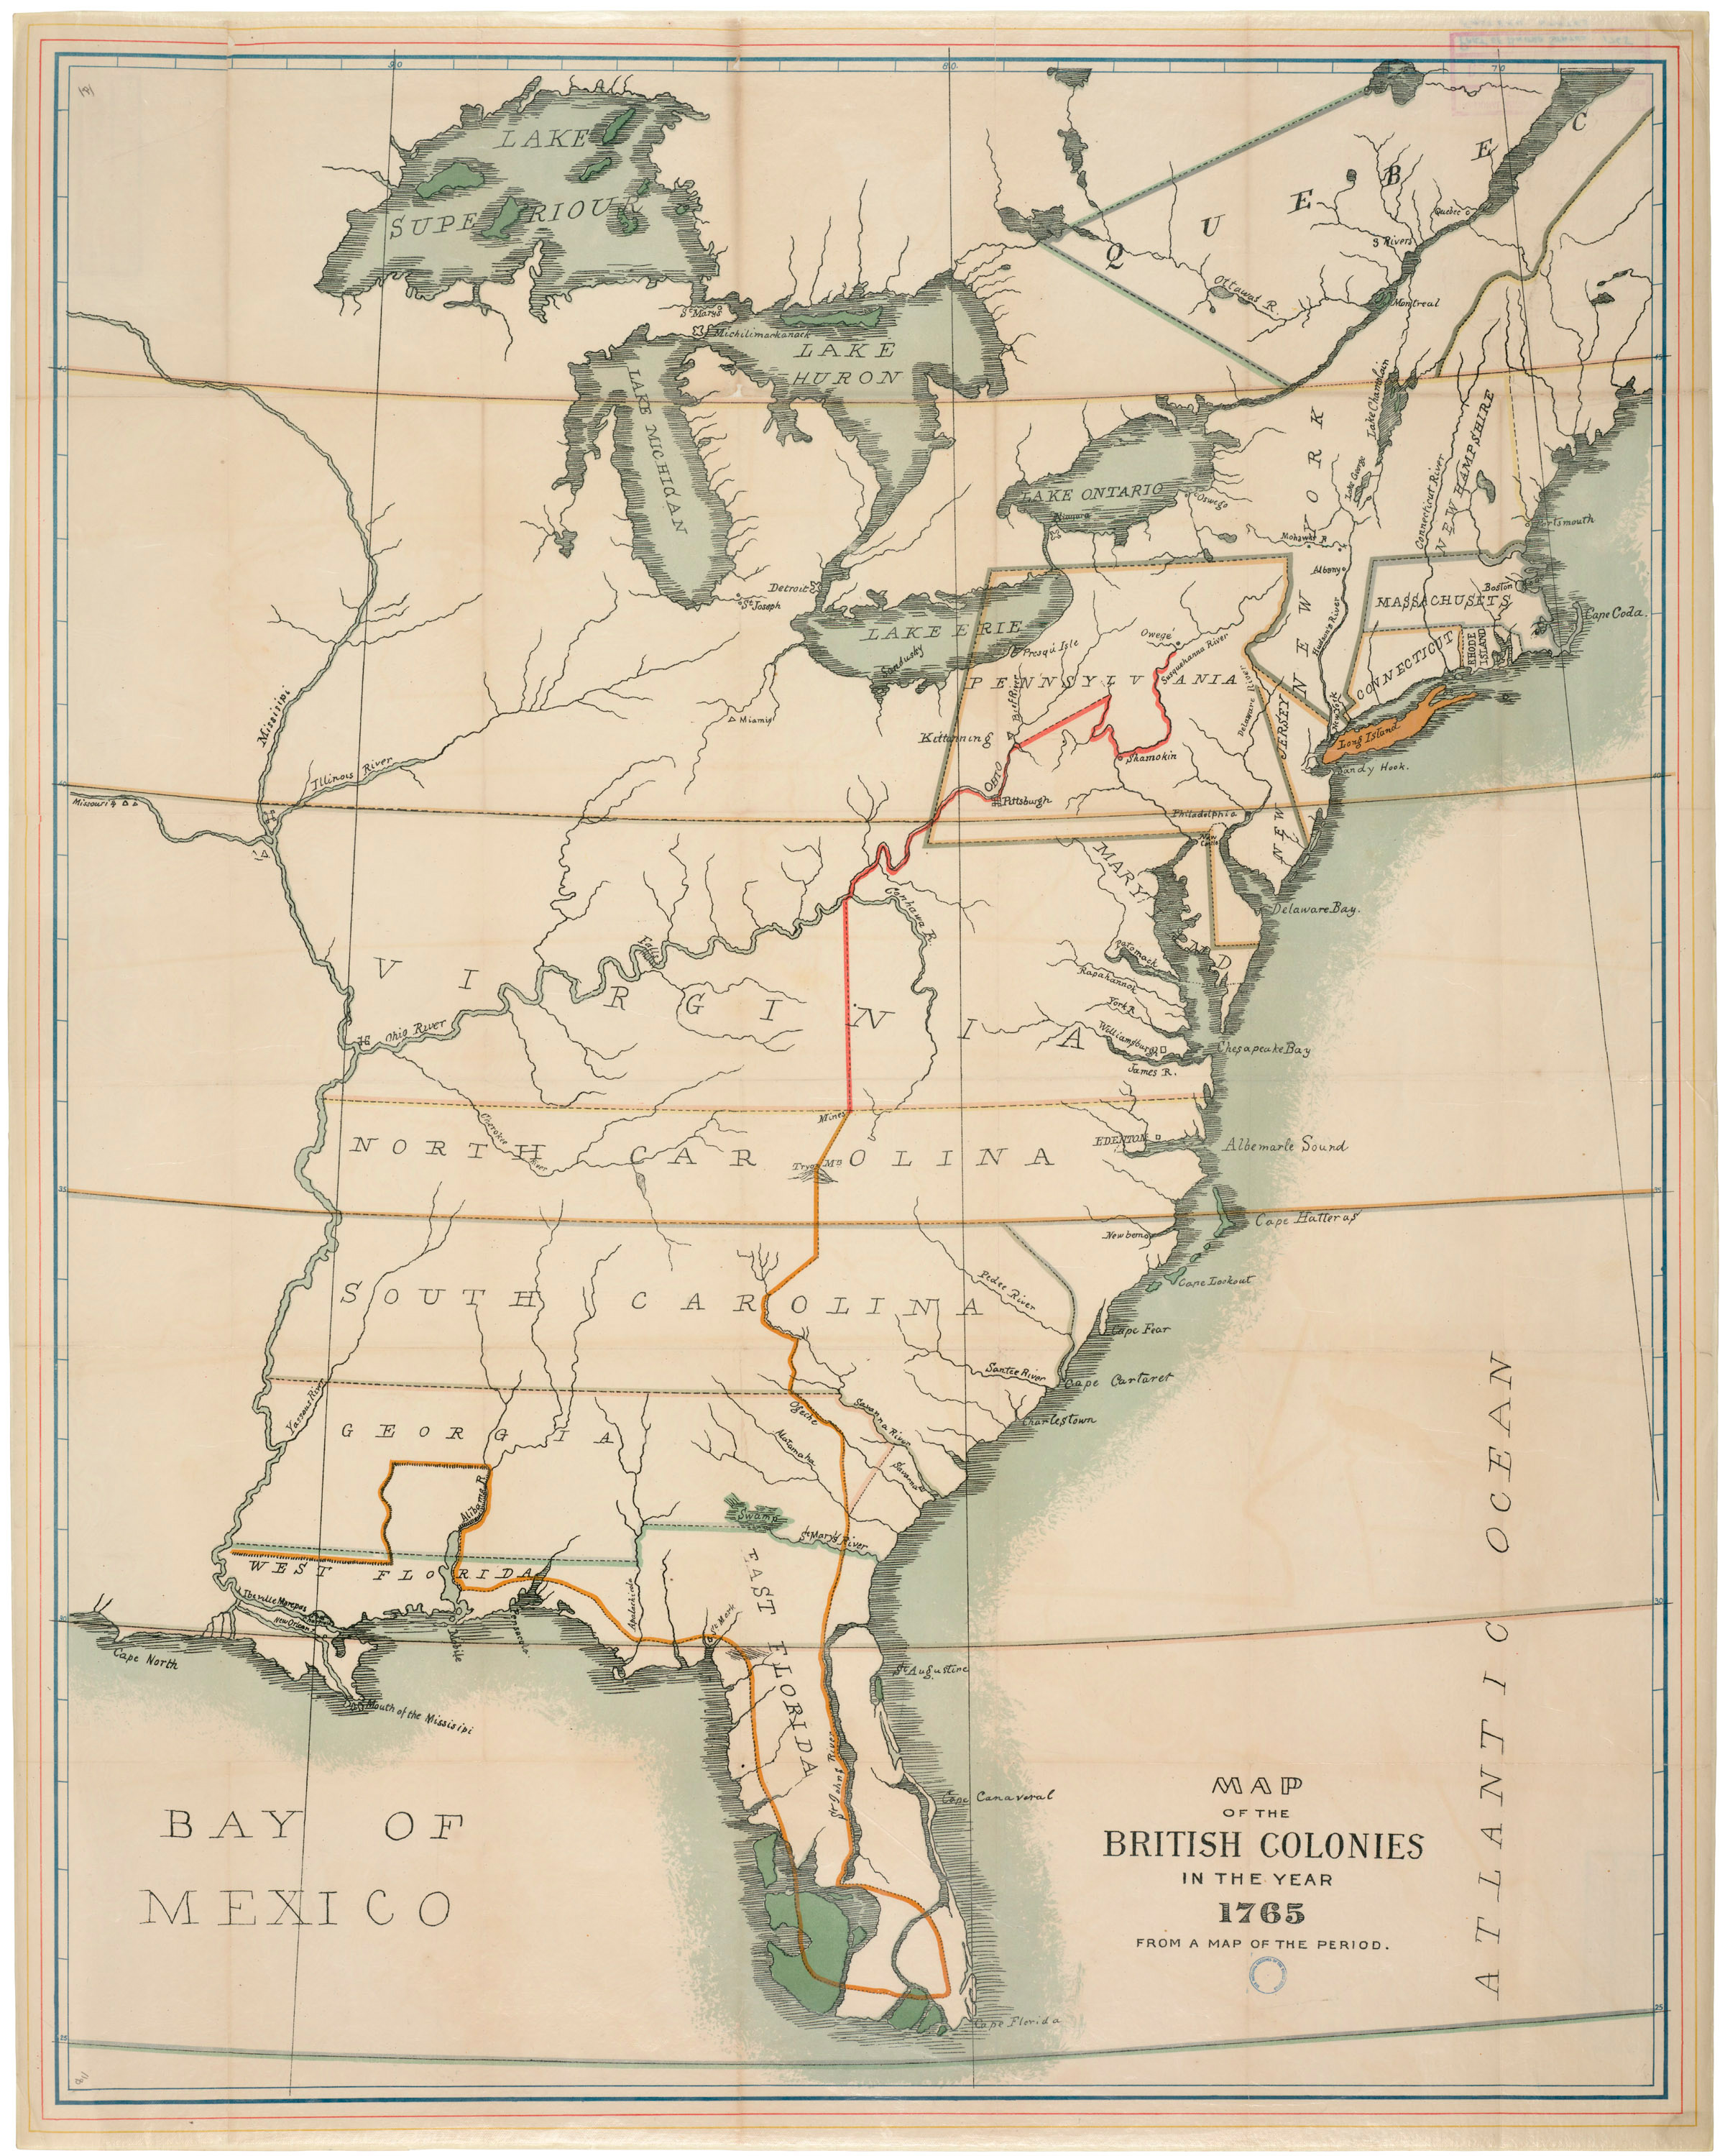 Map of British Colonies in 1765